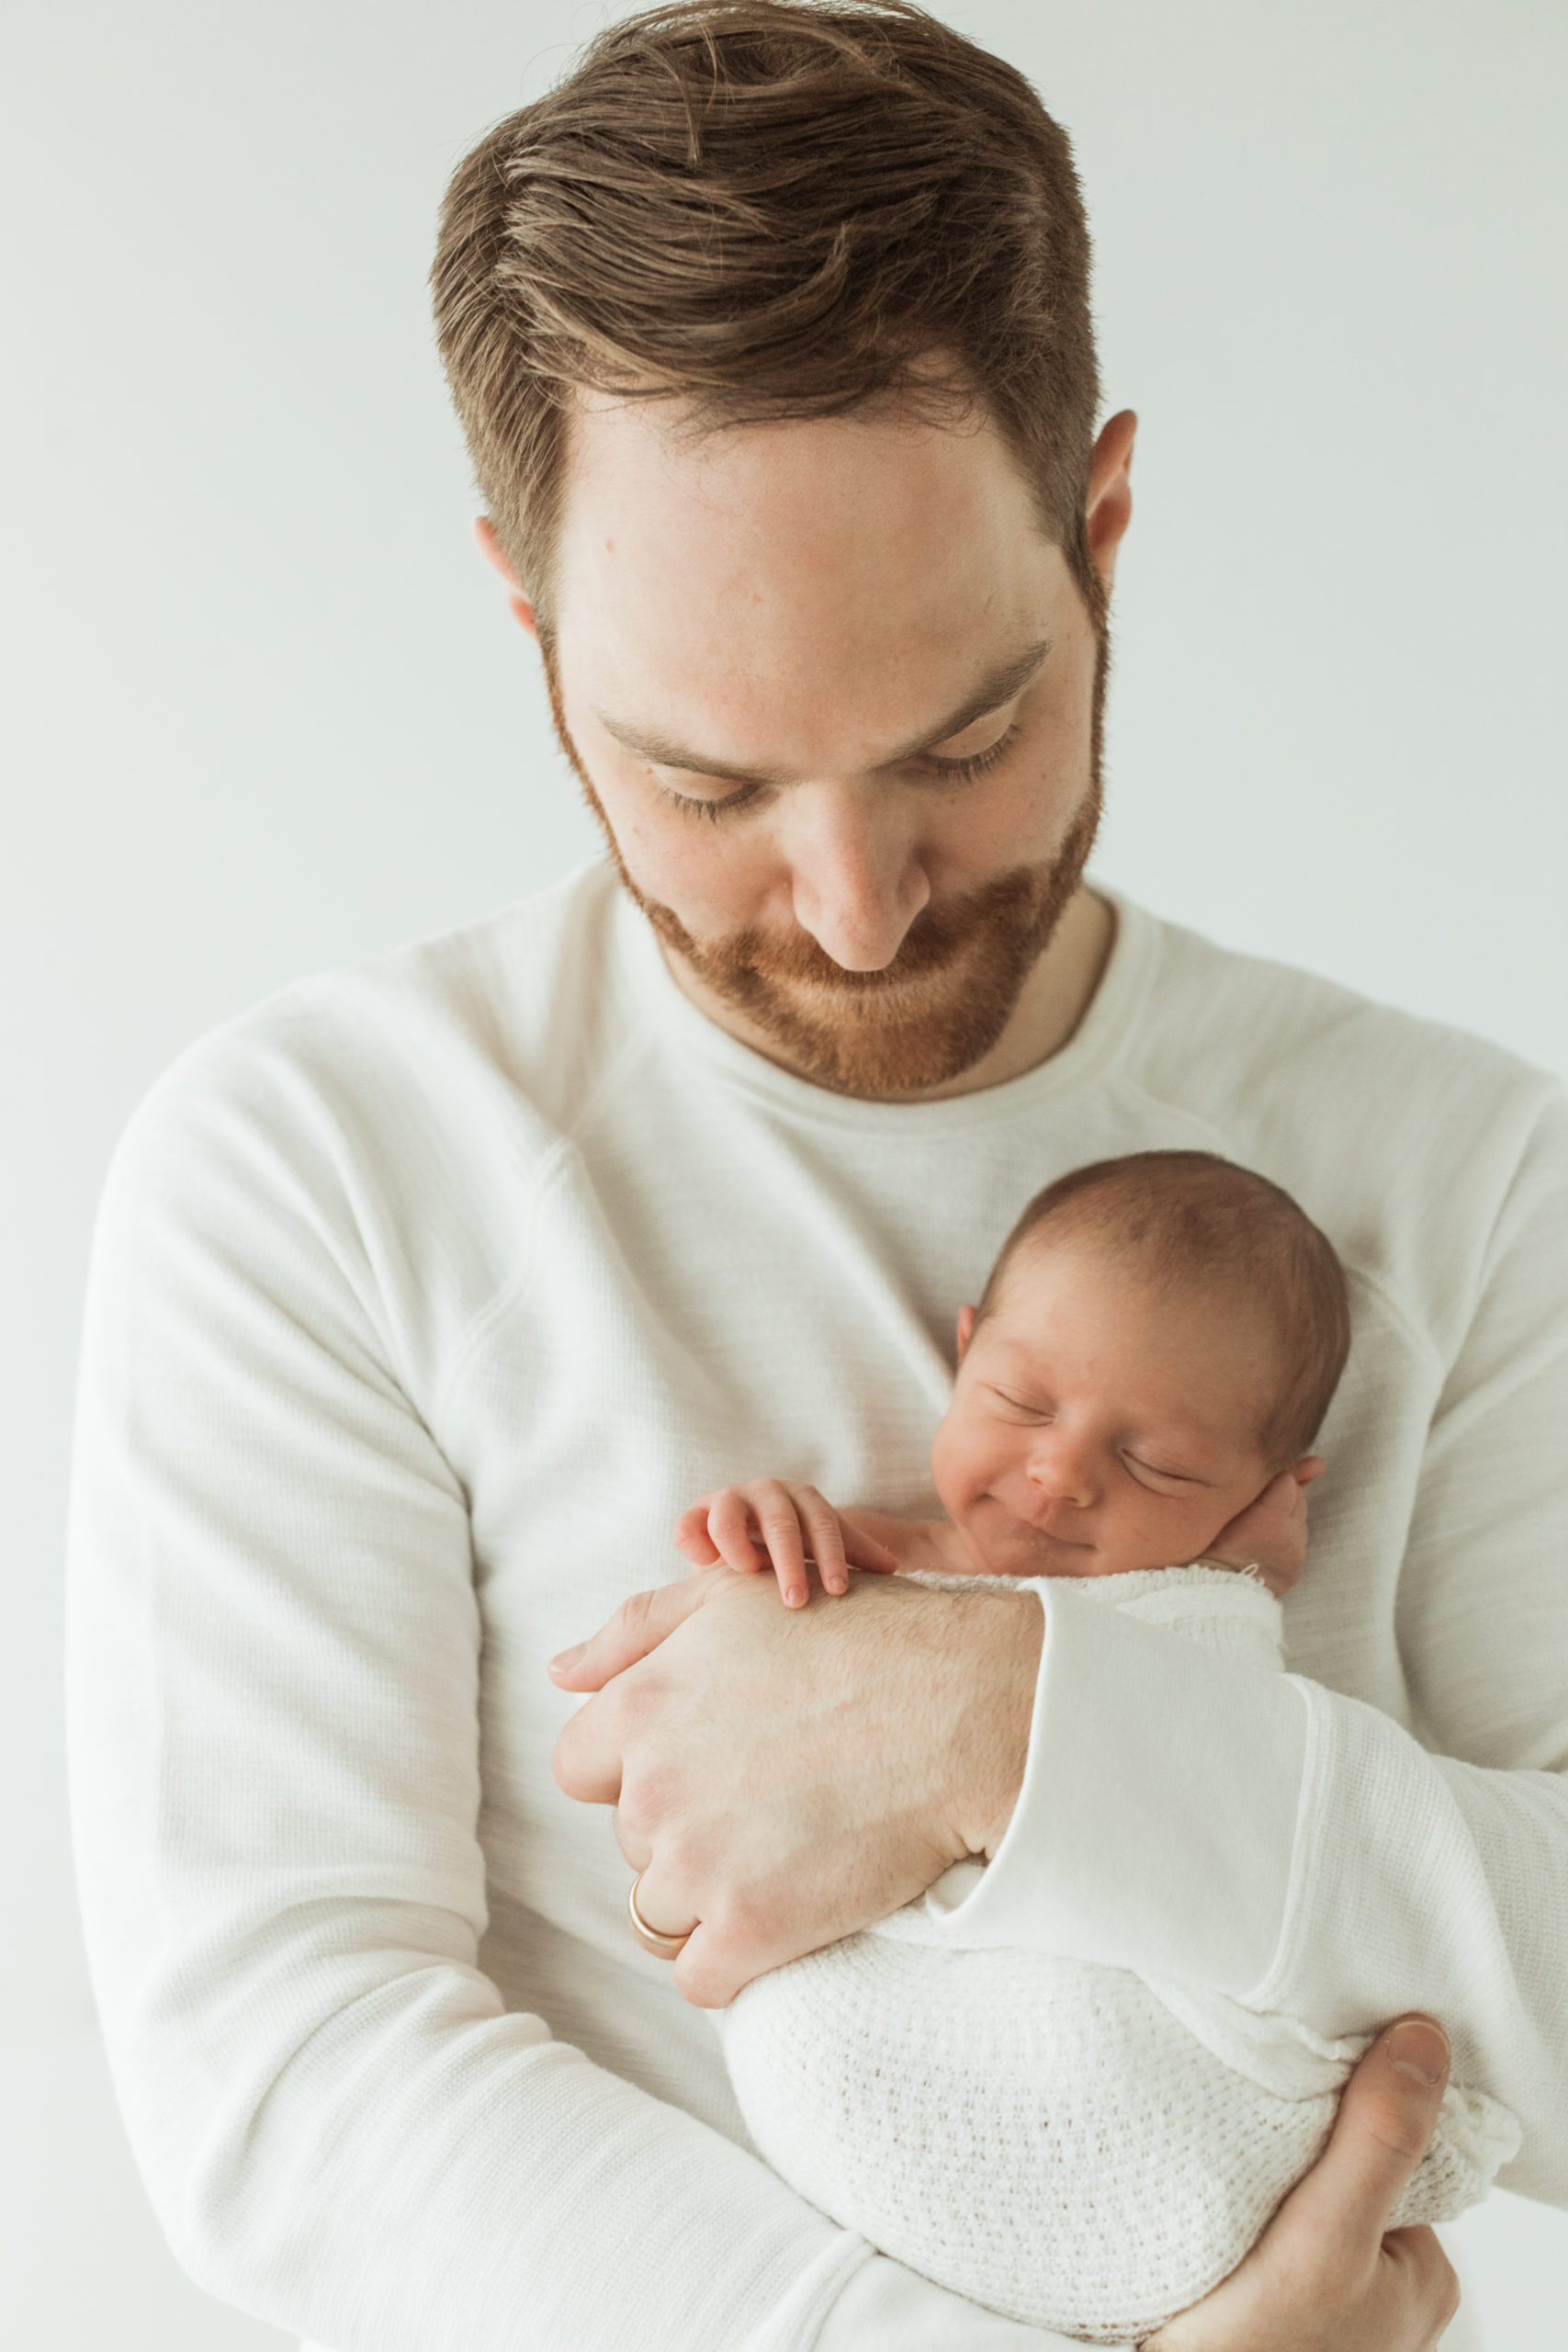 Dad in white long sleeve sweater holding his newborn baby girl wrapped up in white blanket near his chest. Both dad and baby facing the camera. Dad looking down at his daughter. Newborn baby girl with eyes closed smiling and hand on dad's.